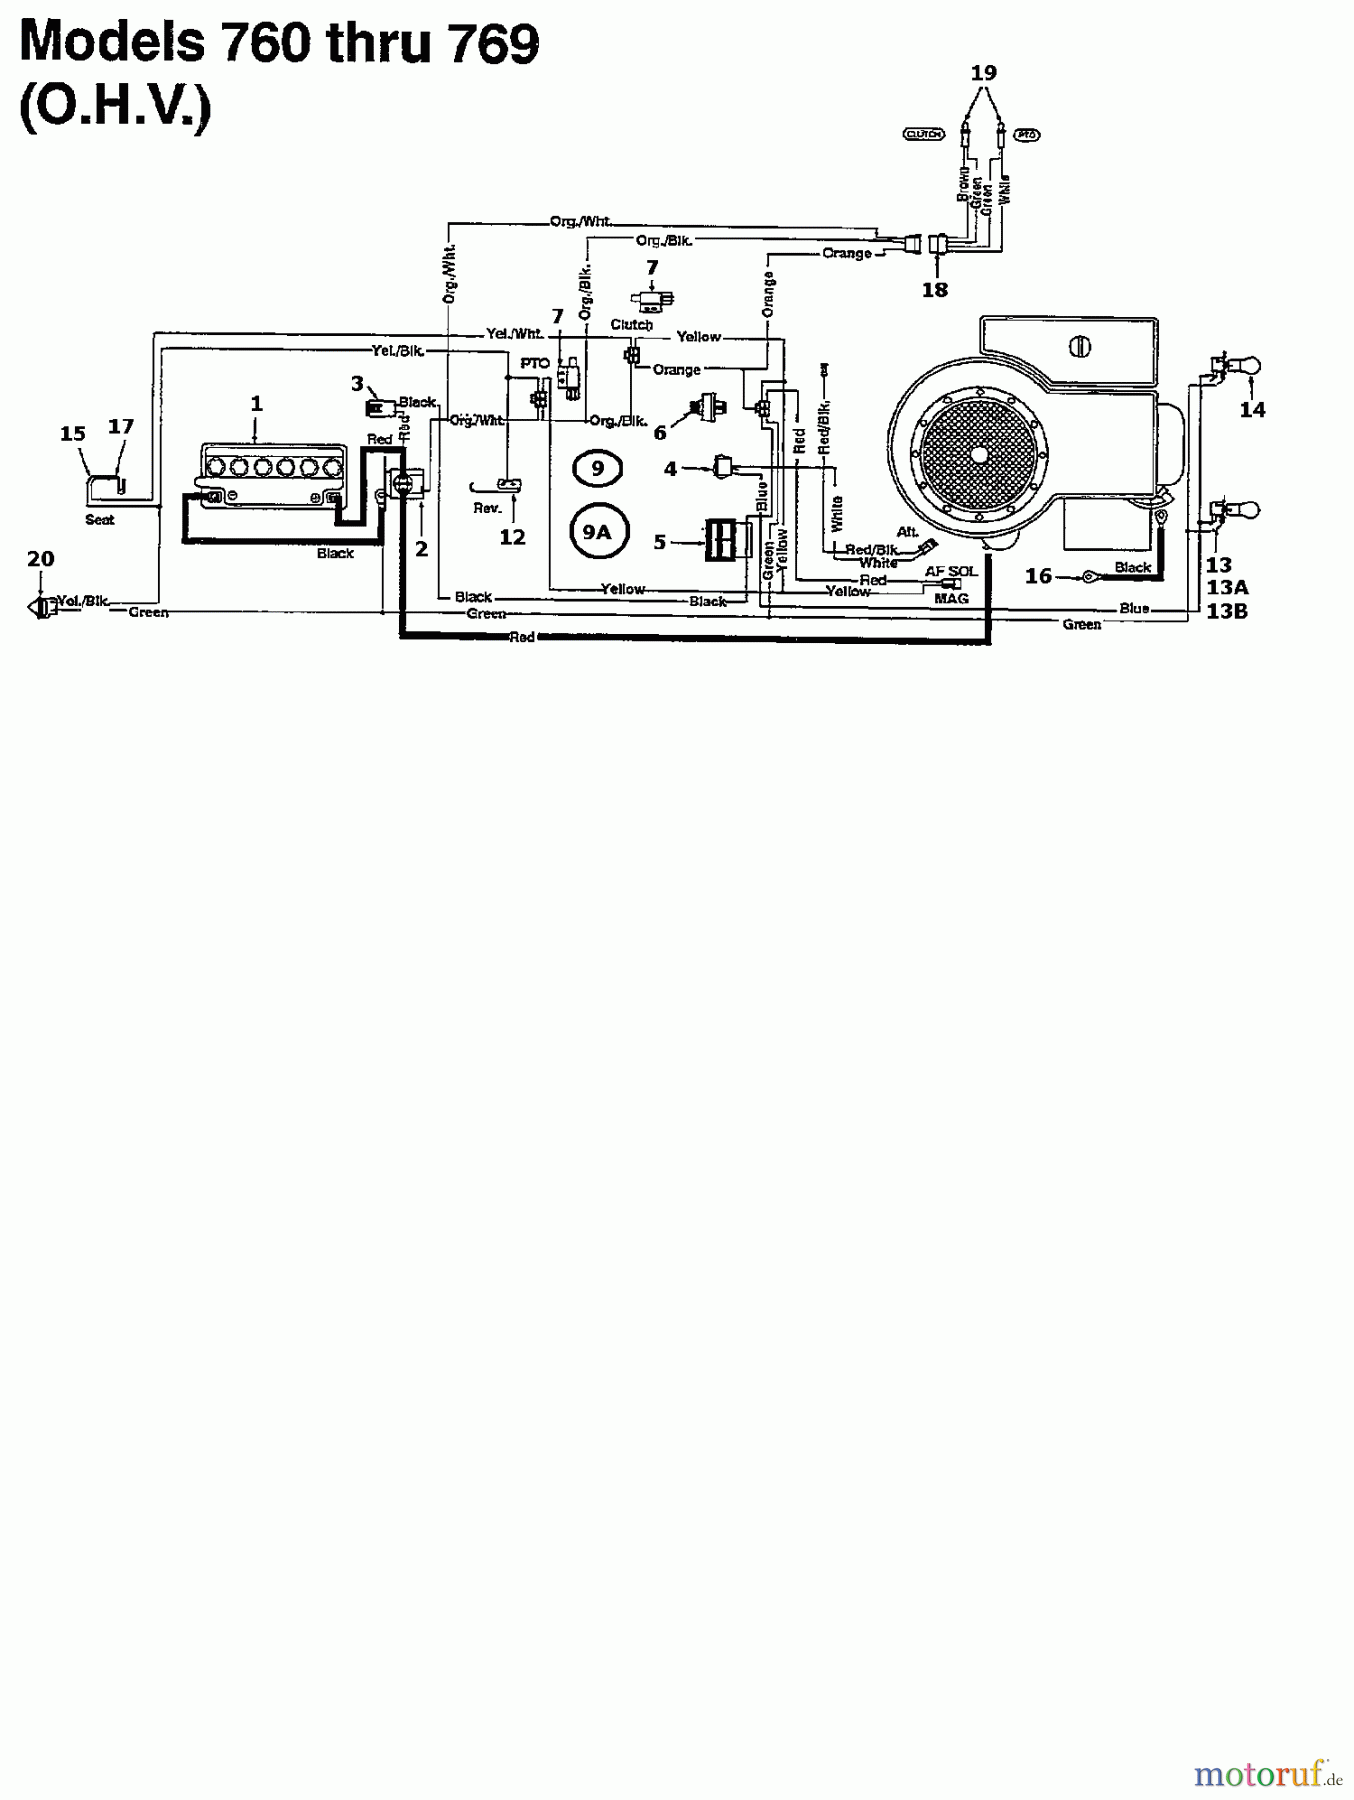  Gutbrod Lawn tractors Sprint 2000 04200.01  (1995) Wiring diagram for O.H.V.